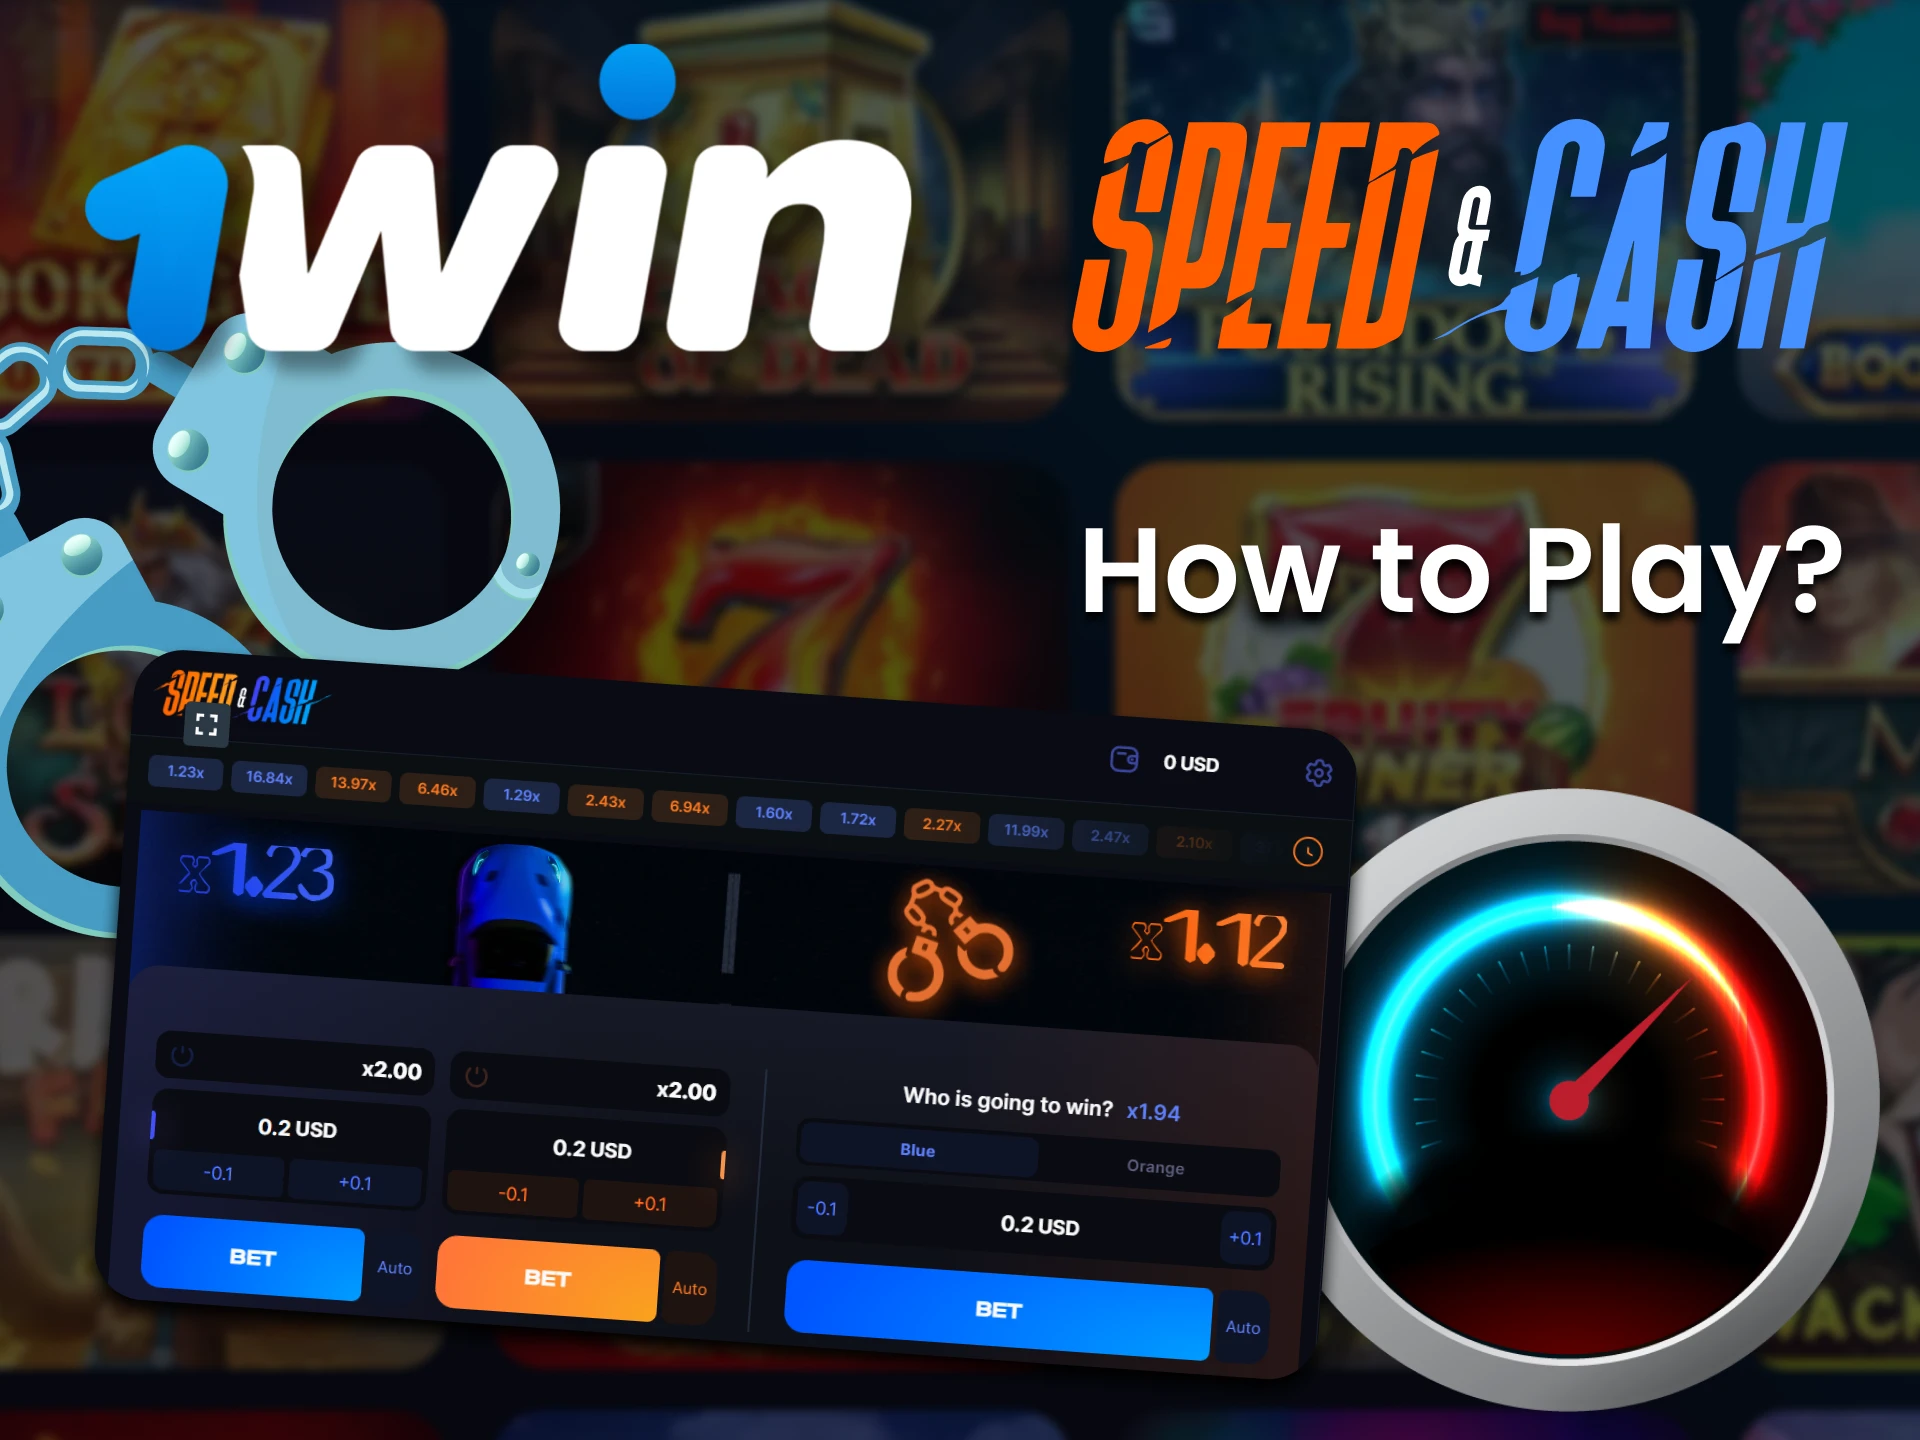 Register and find the 1Win Speed & Cash game to start playing.